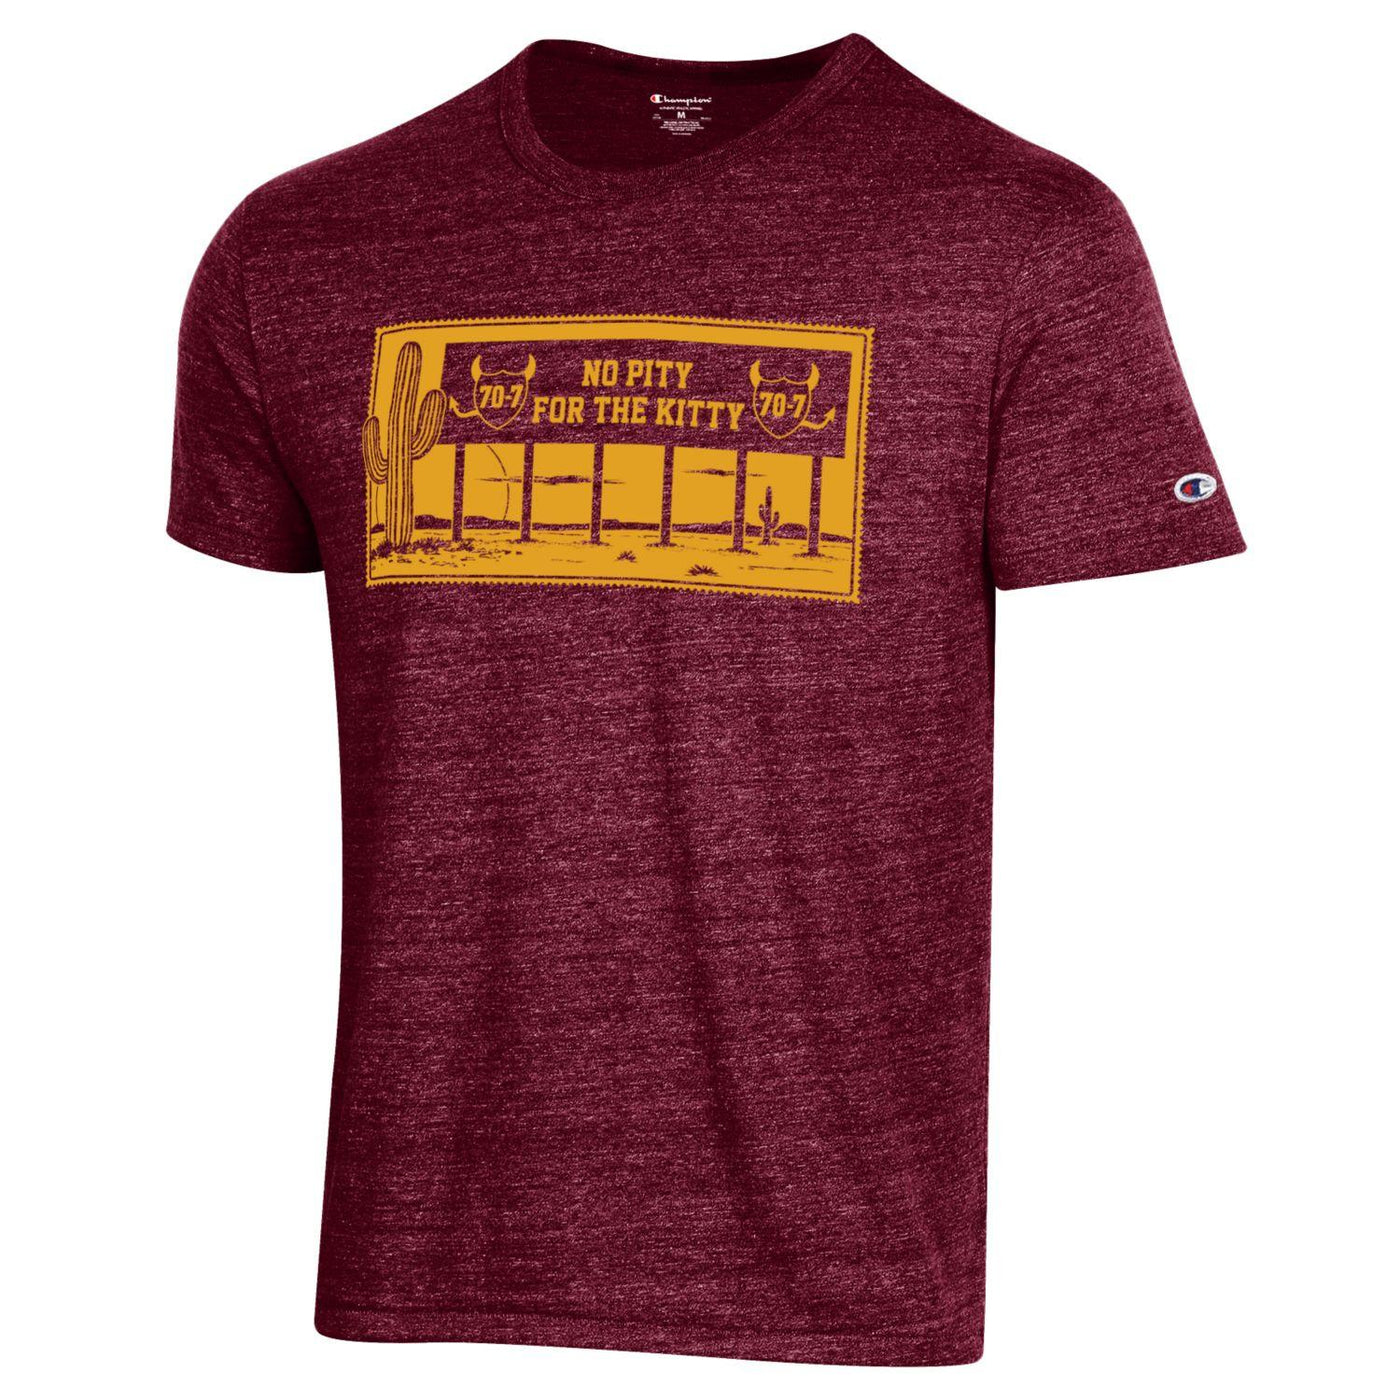 ASU heather maroon tee with rectangle image of billboard showing '70-7' and 'No Pity For The Pity' in a desert setting